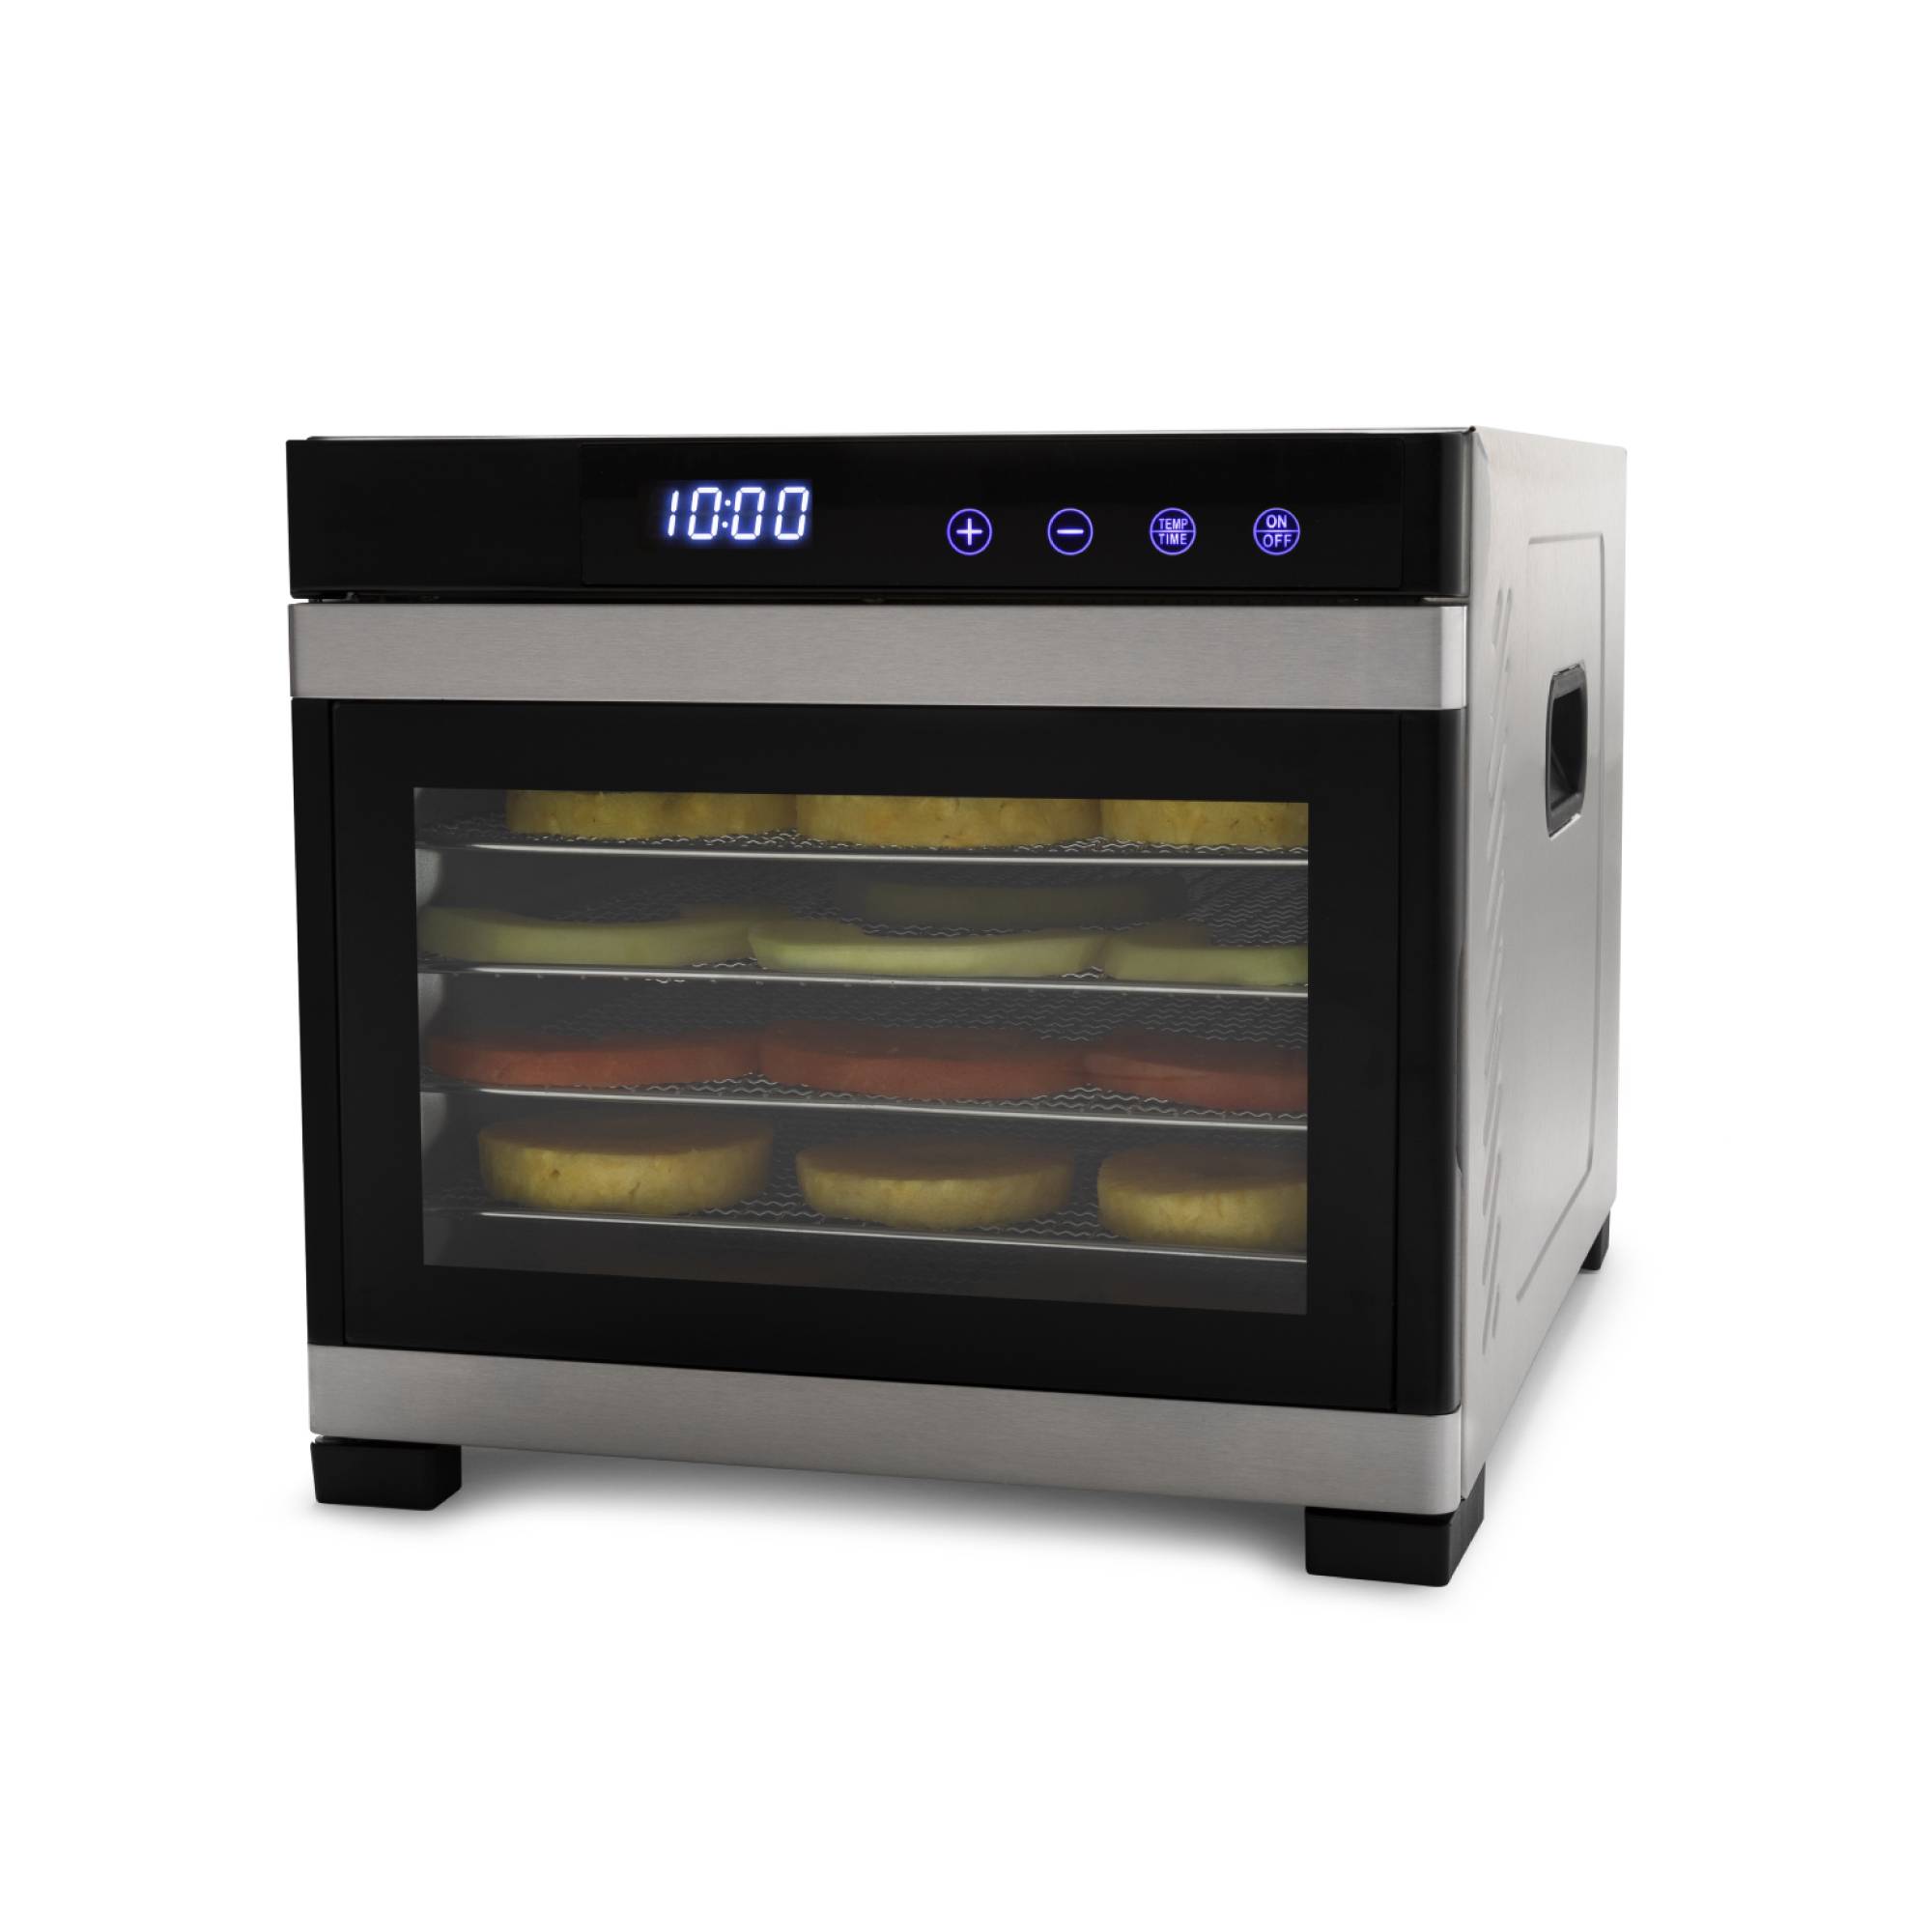 ChefWave Secco Pro Food Dehydrator with 6 Drying Racks (Stainless Steel)